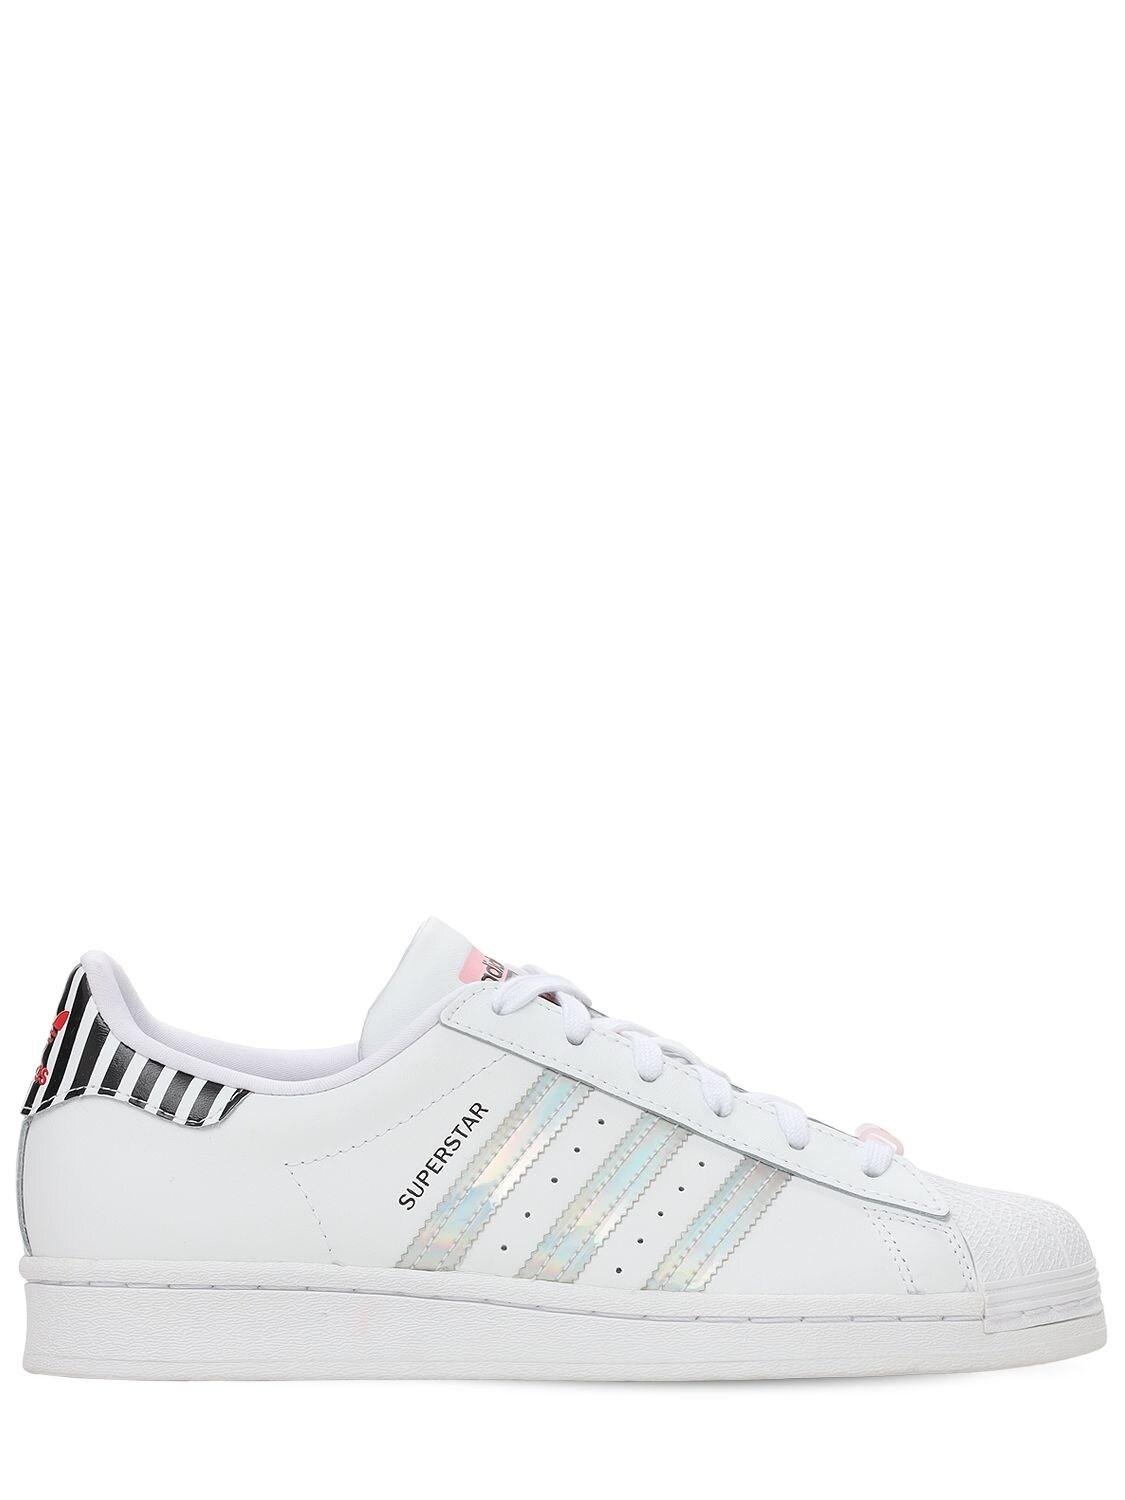 adidas Originals Leather Zebra Superstar Bold Sneakers in White | Lyst